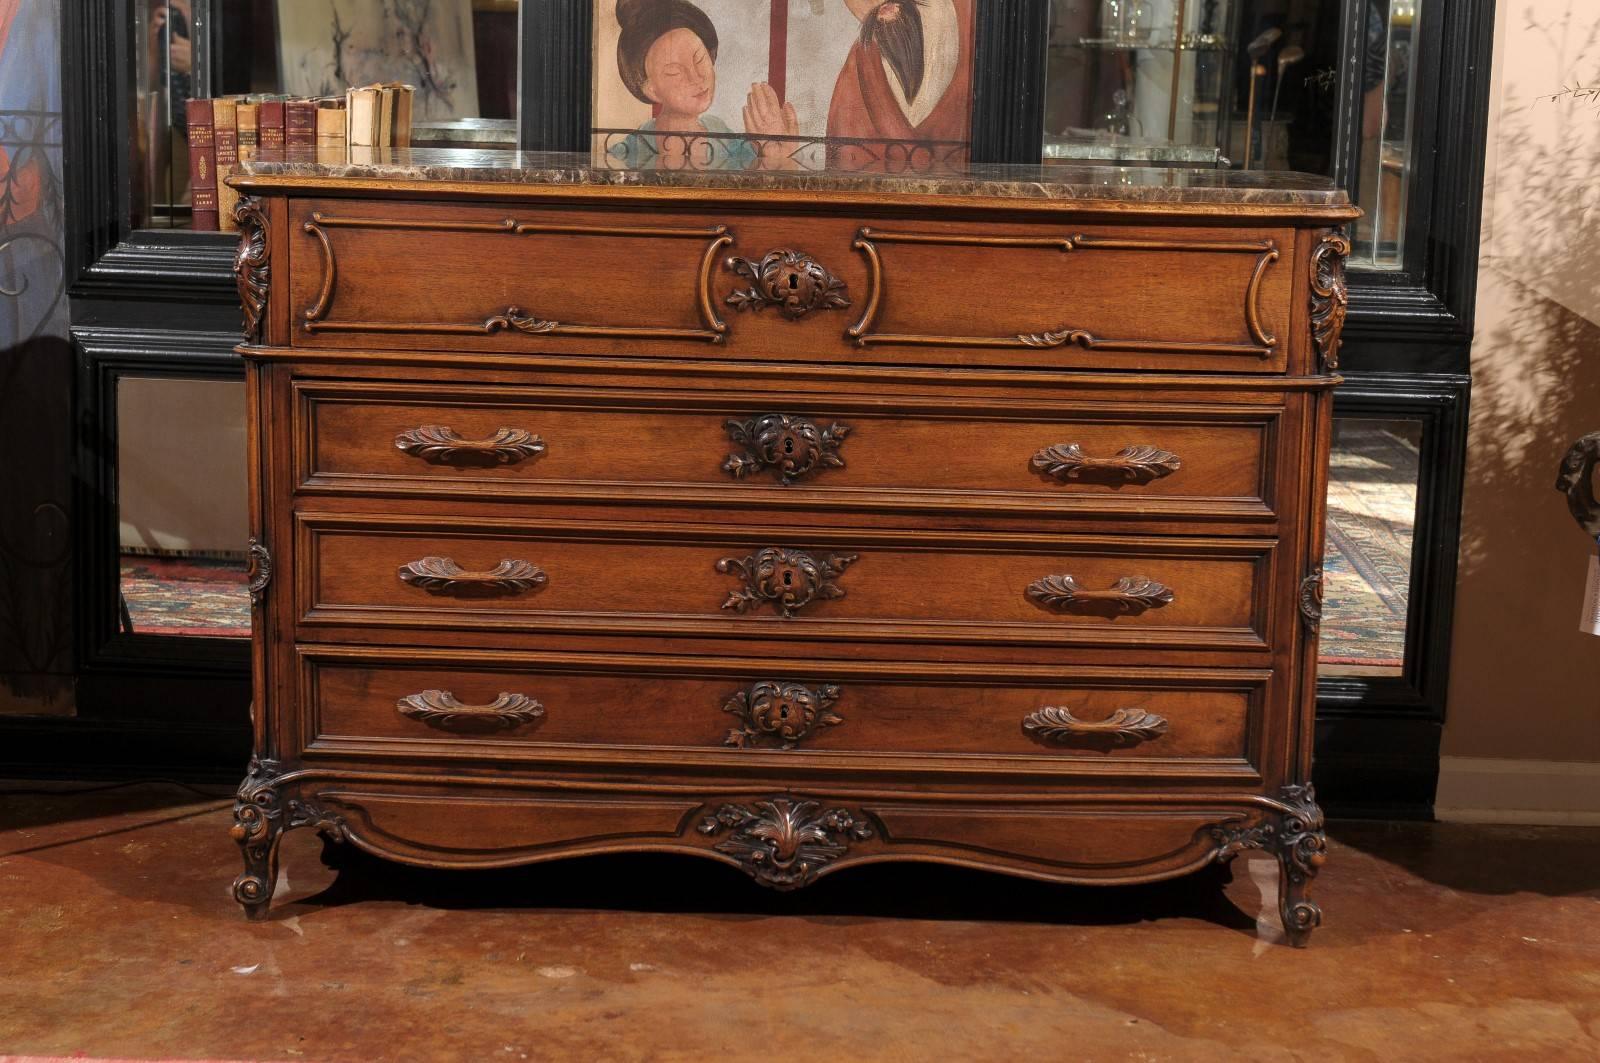 This is a beautifully carved walnut chest of drawers with marble top. The marble top is in beautiful condition in shades of brown and follows the bombe shape of the piece.
Late 19th century, this unique slight bombe chest has four drawers. The top